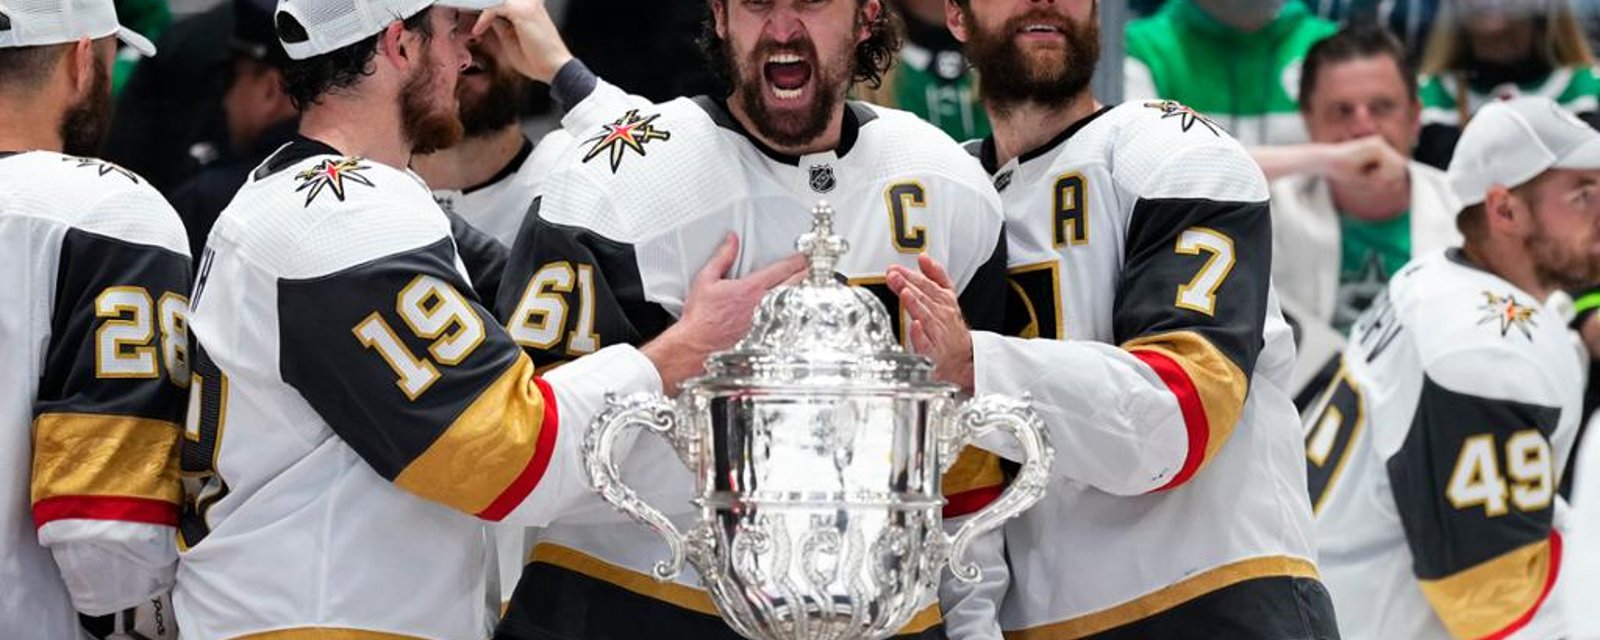 Golden Knights get offered ‘free lap dances for life’ to win the Stanley Cup